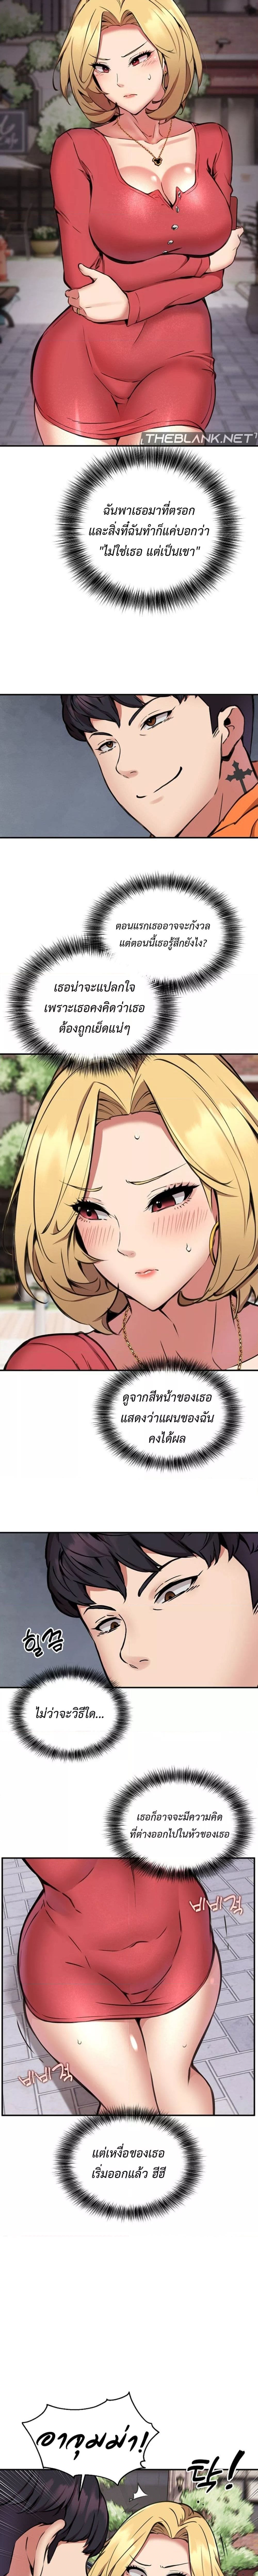 Driver in the New City ตอนที่ 8 ภาพ 6